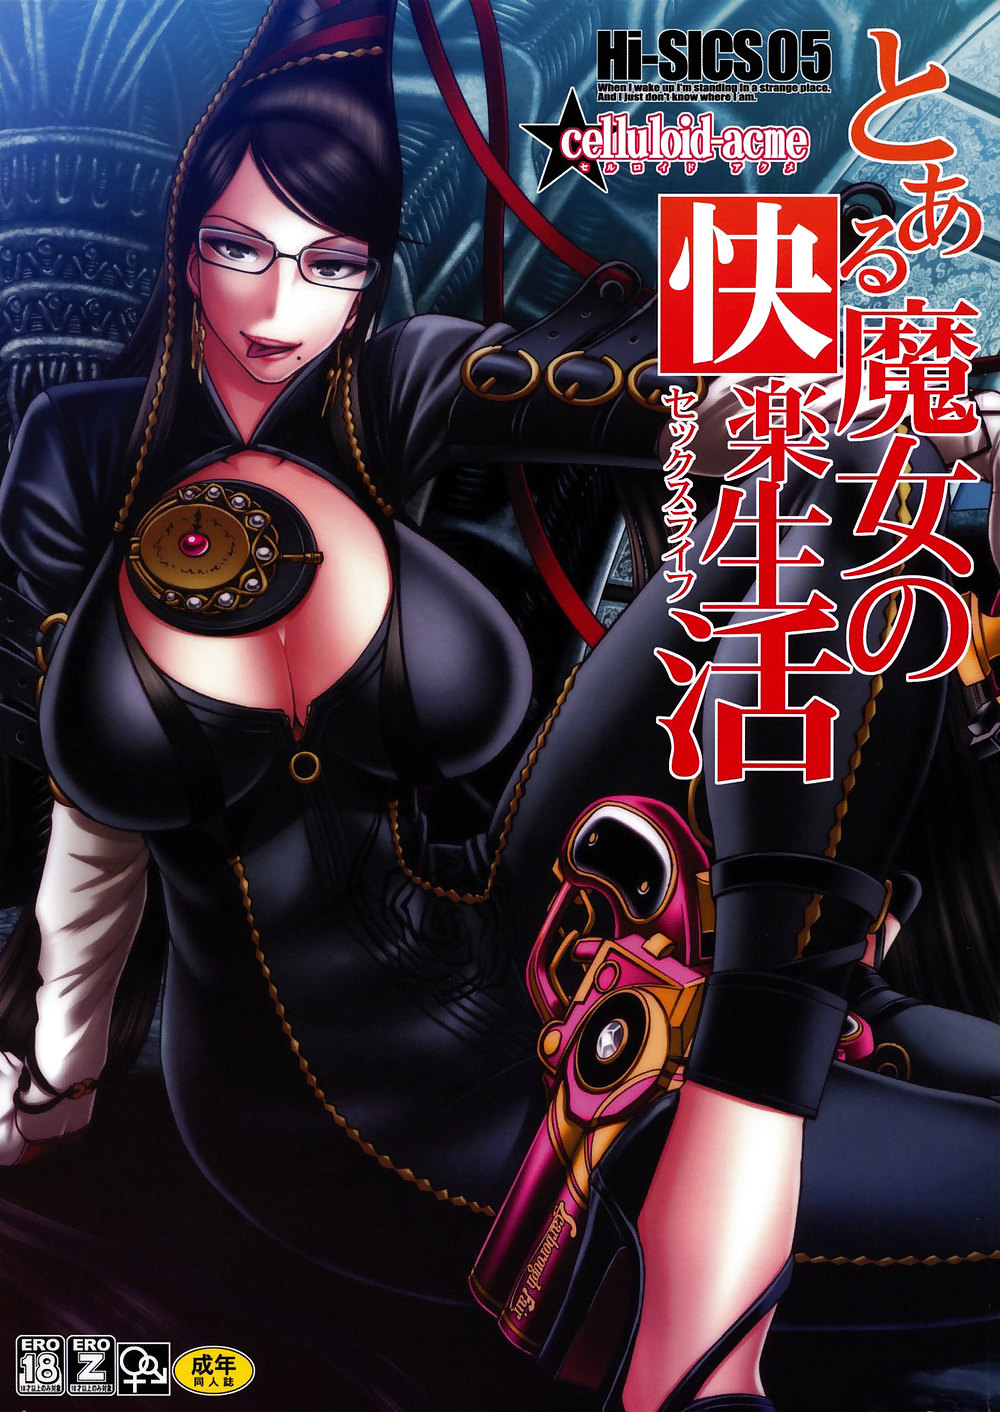 Bayonetta - a certain witchs sex life #17353892